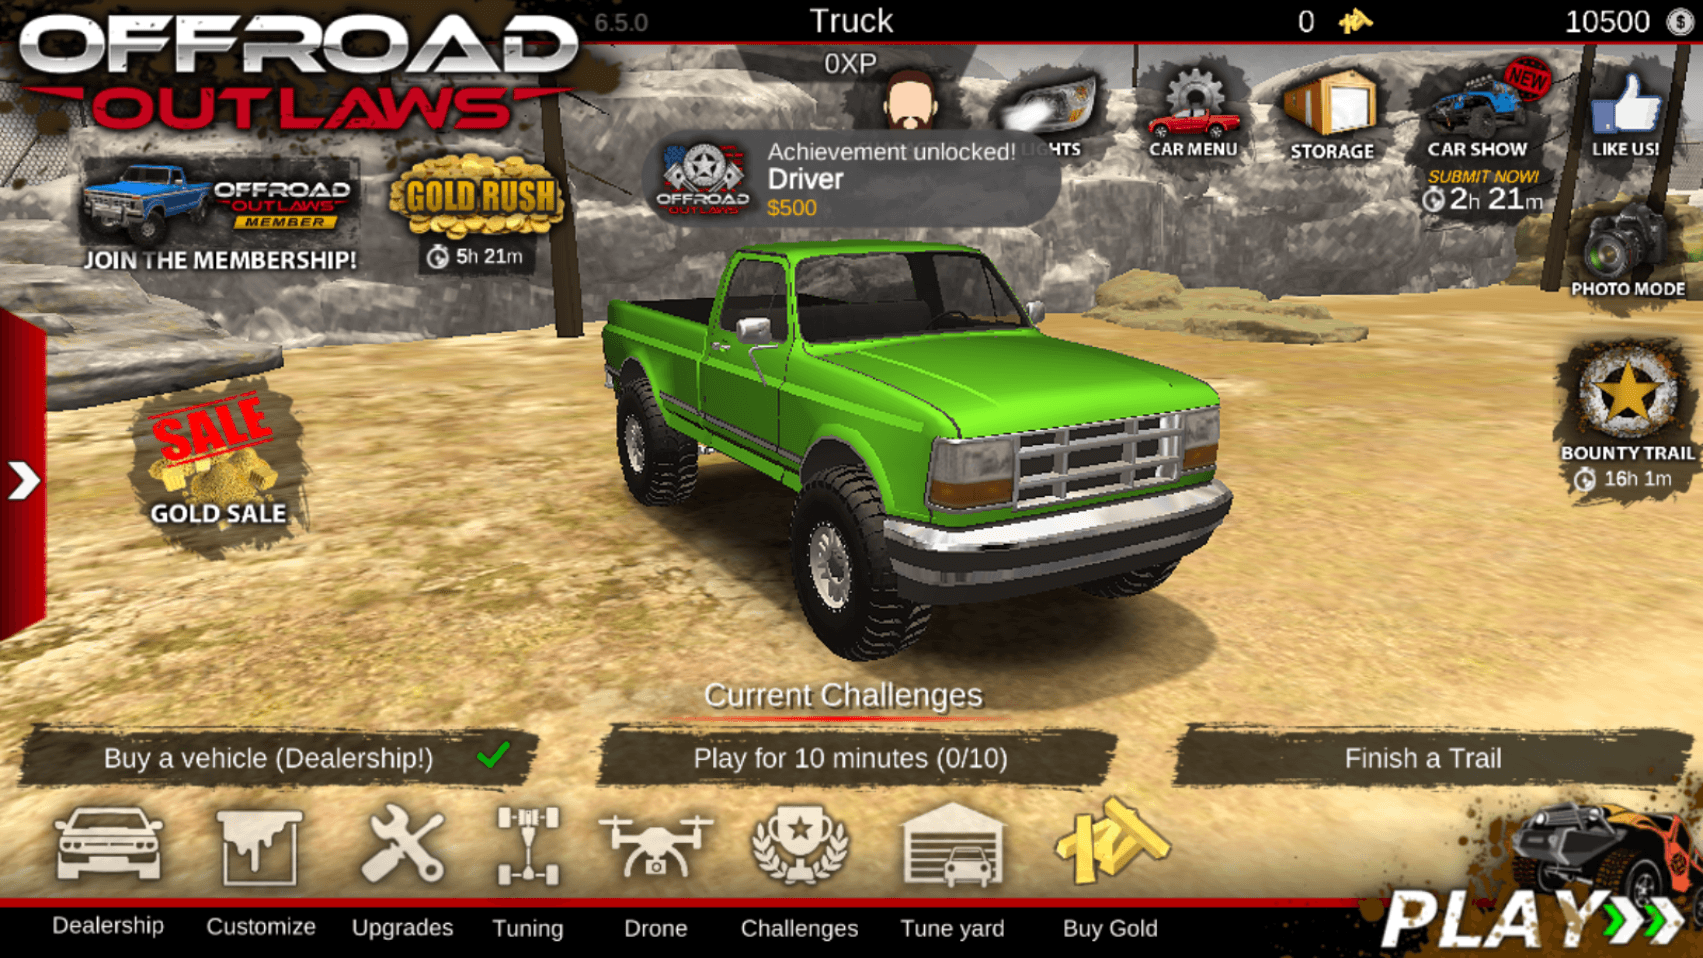 Enjoy Offroad Outlaws’ Ultimate Off-Road Adventures on now.gg InstaPlay - Cloud-Based Solution